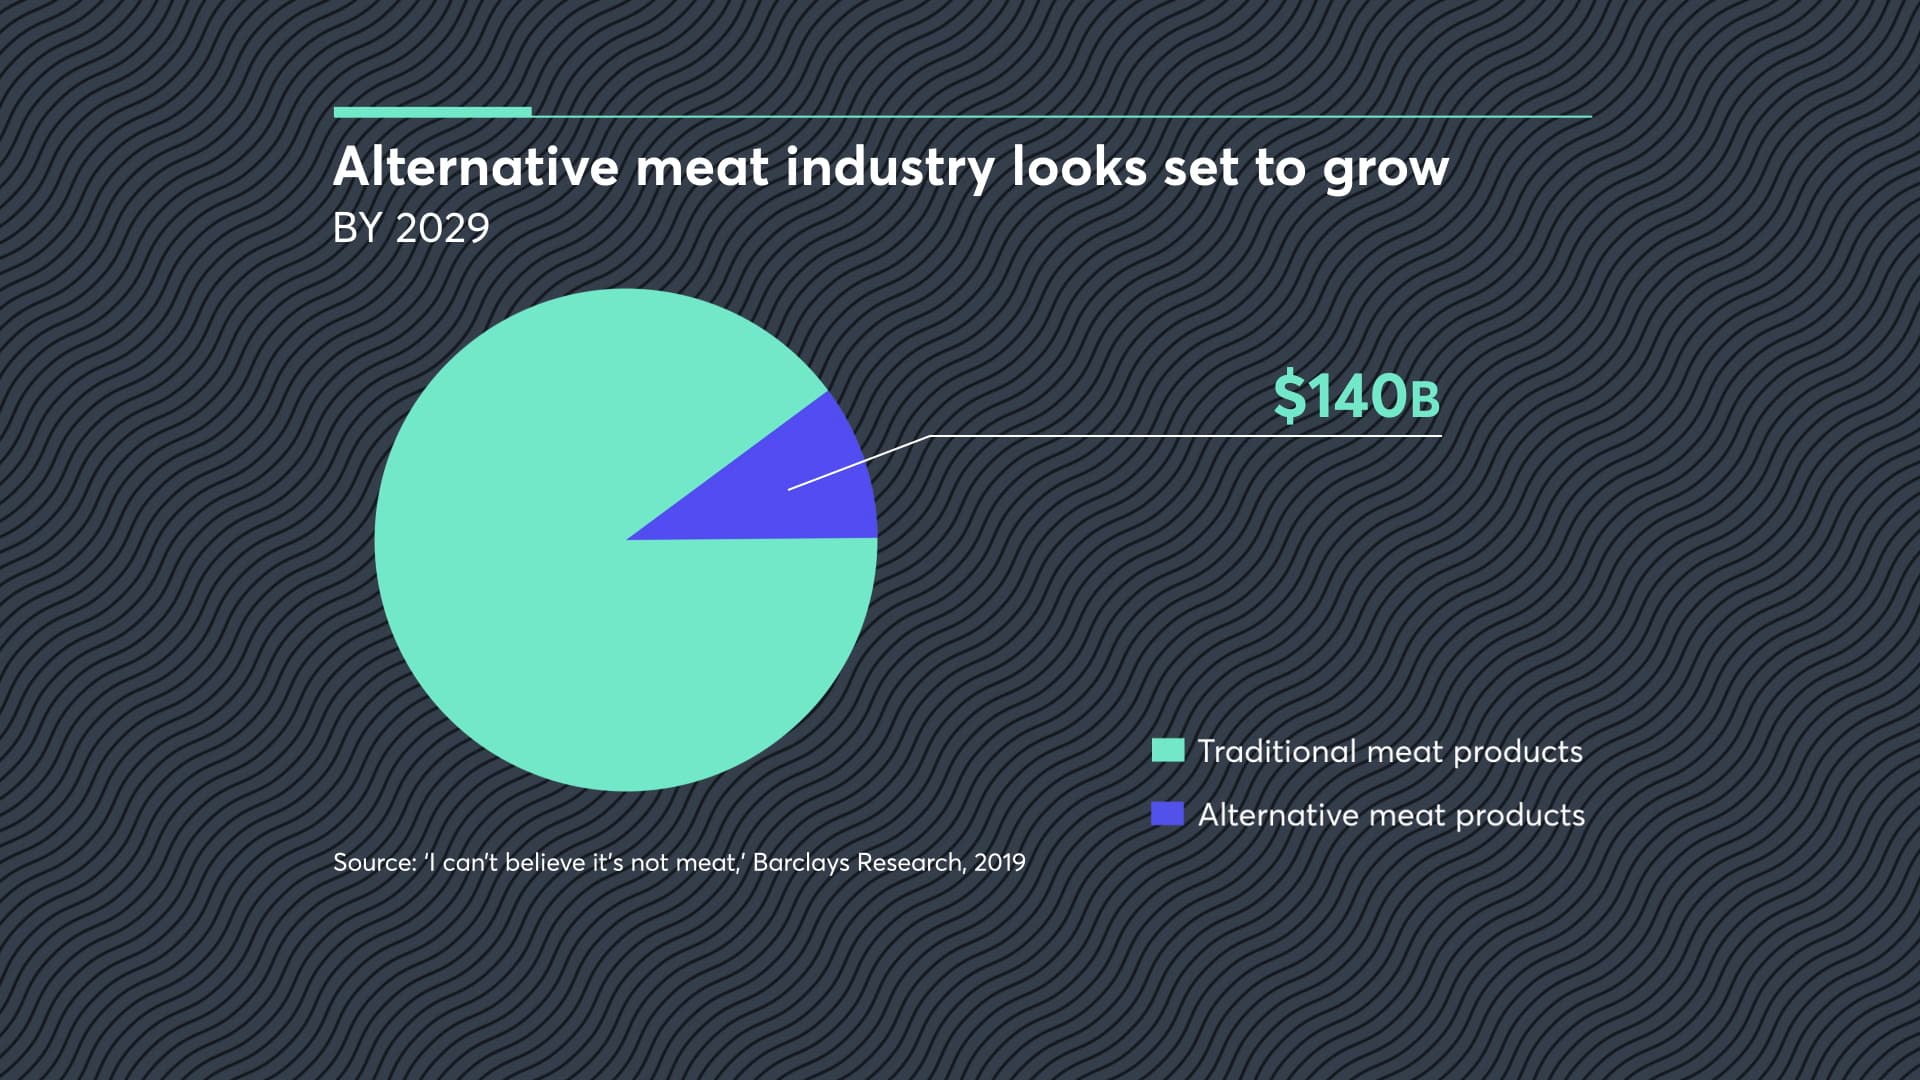 The alternative meat industry is estimated to be worth $140 billion by 2029.